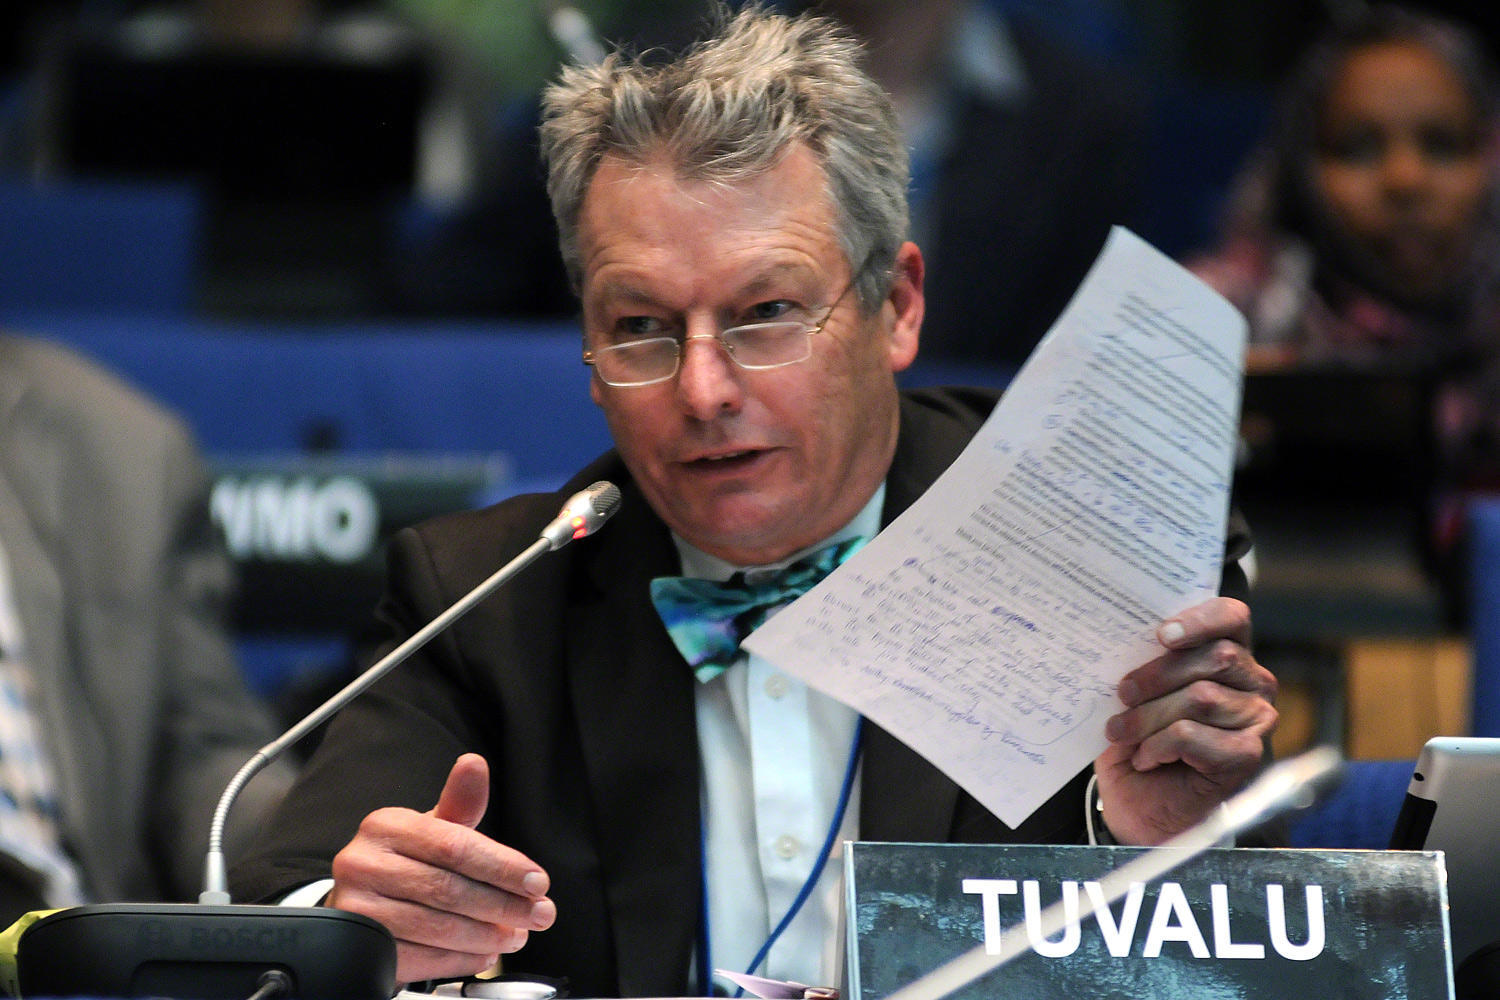 UN Human Rights Council names Tuvalu negotiator Dr Ian Fry as climate expert